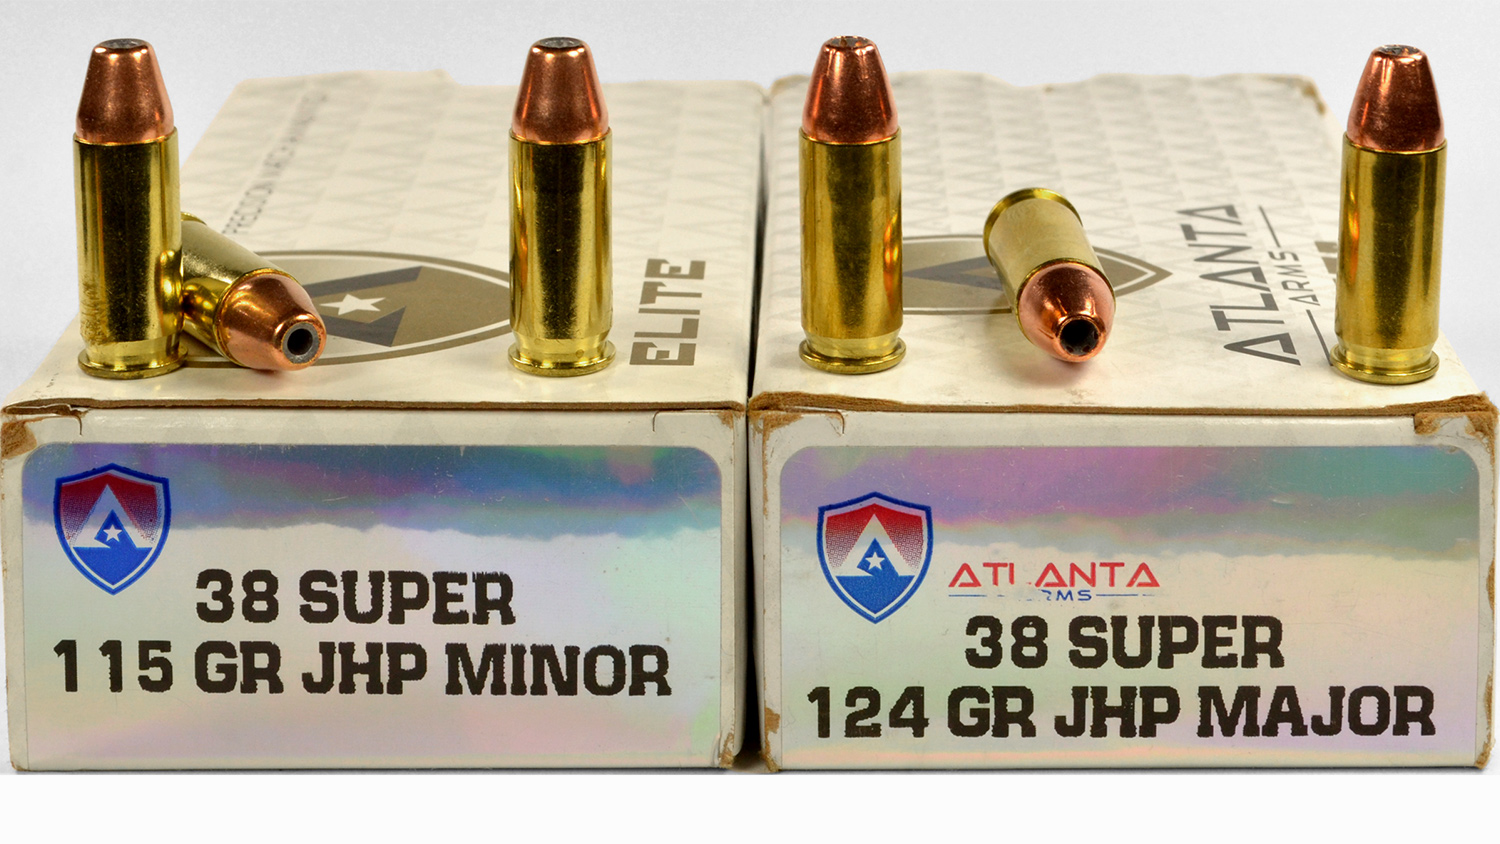 38, 9mm, and 22LR rounds with a large spent bullet casing - see